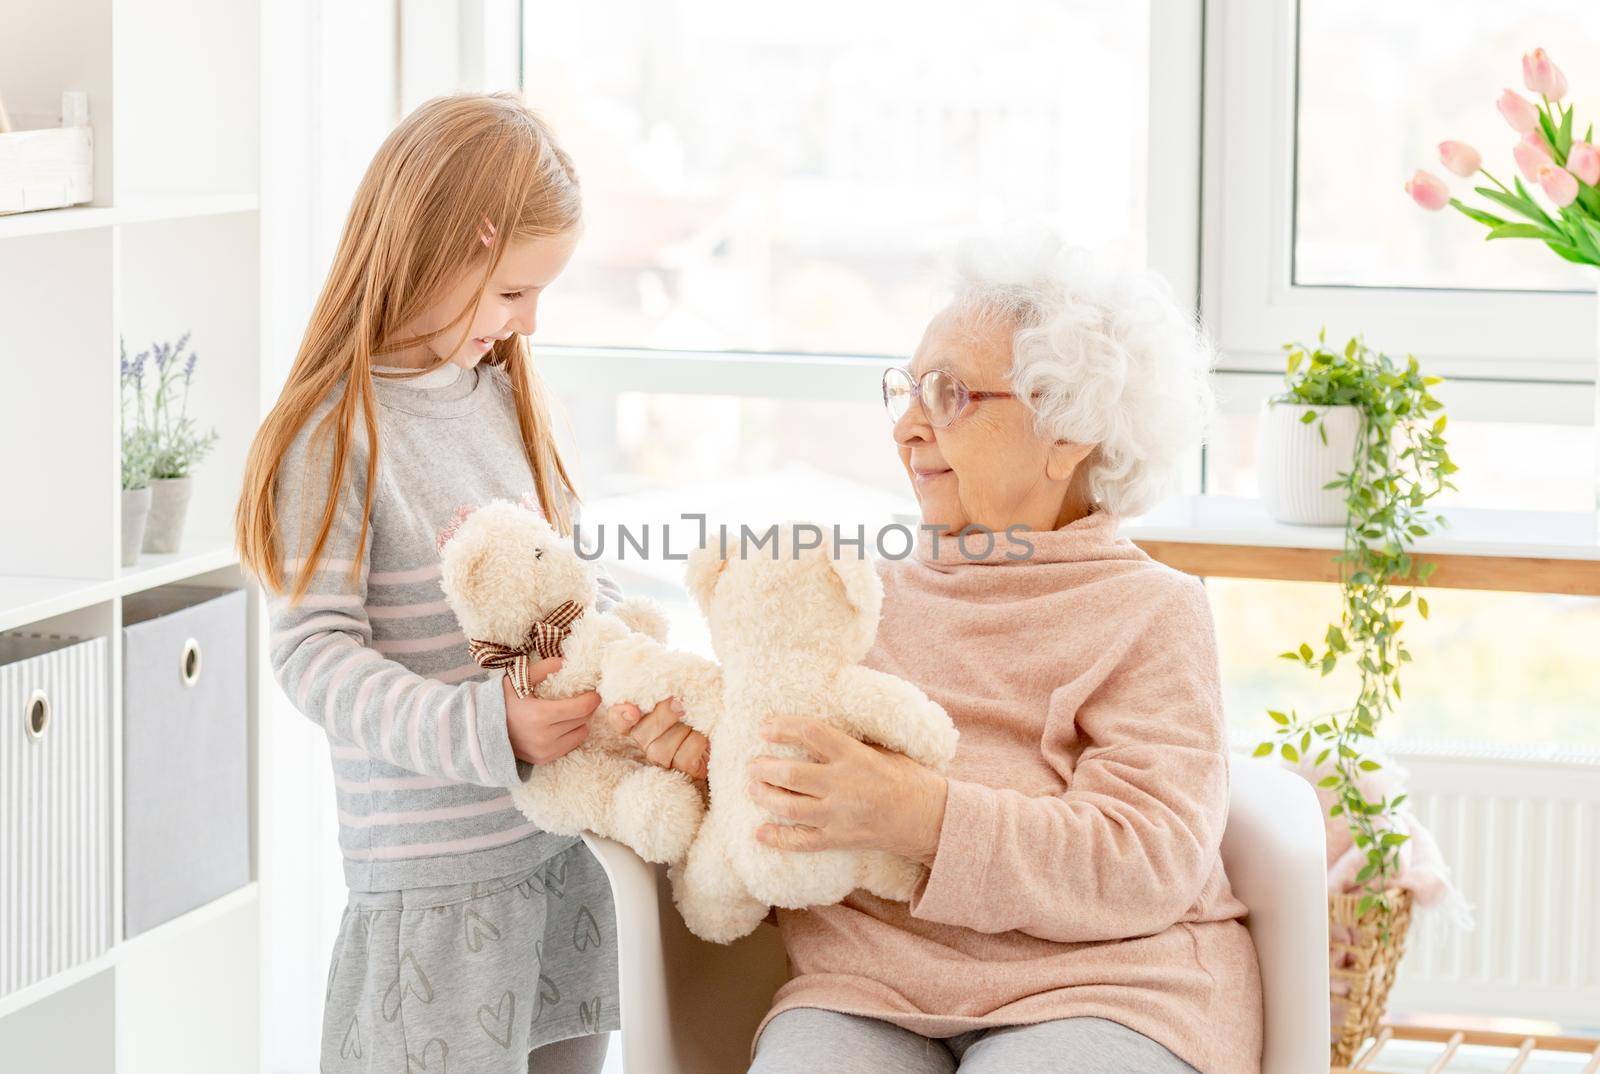 Cute little girl playing plush toys with grandmother